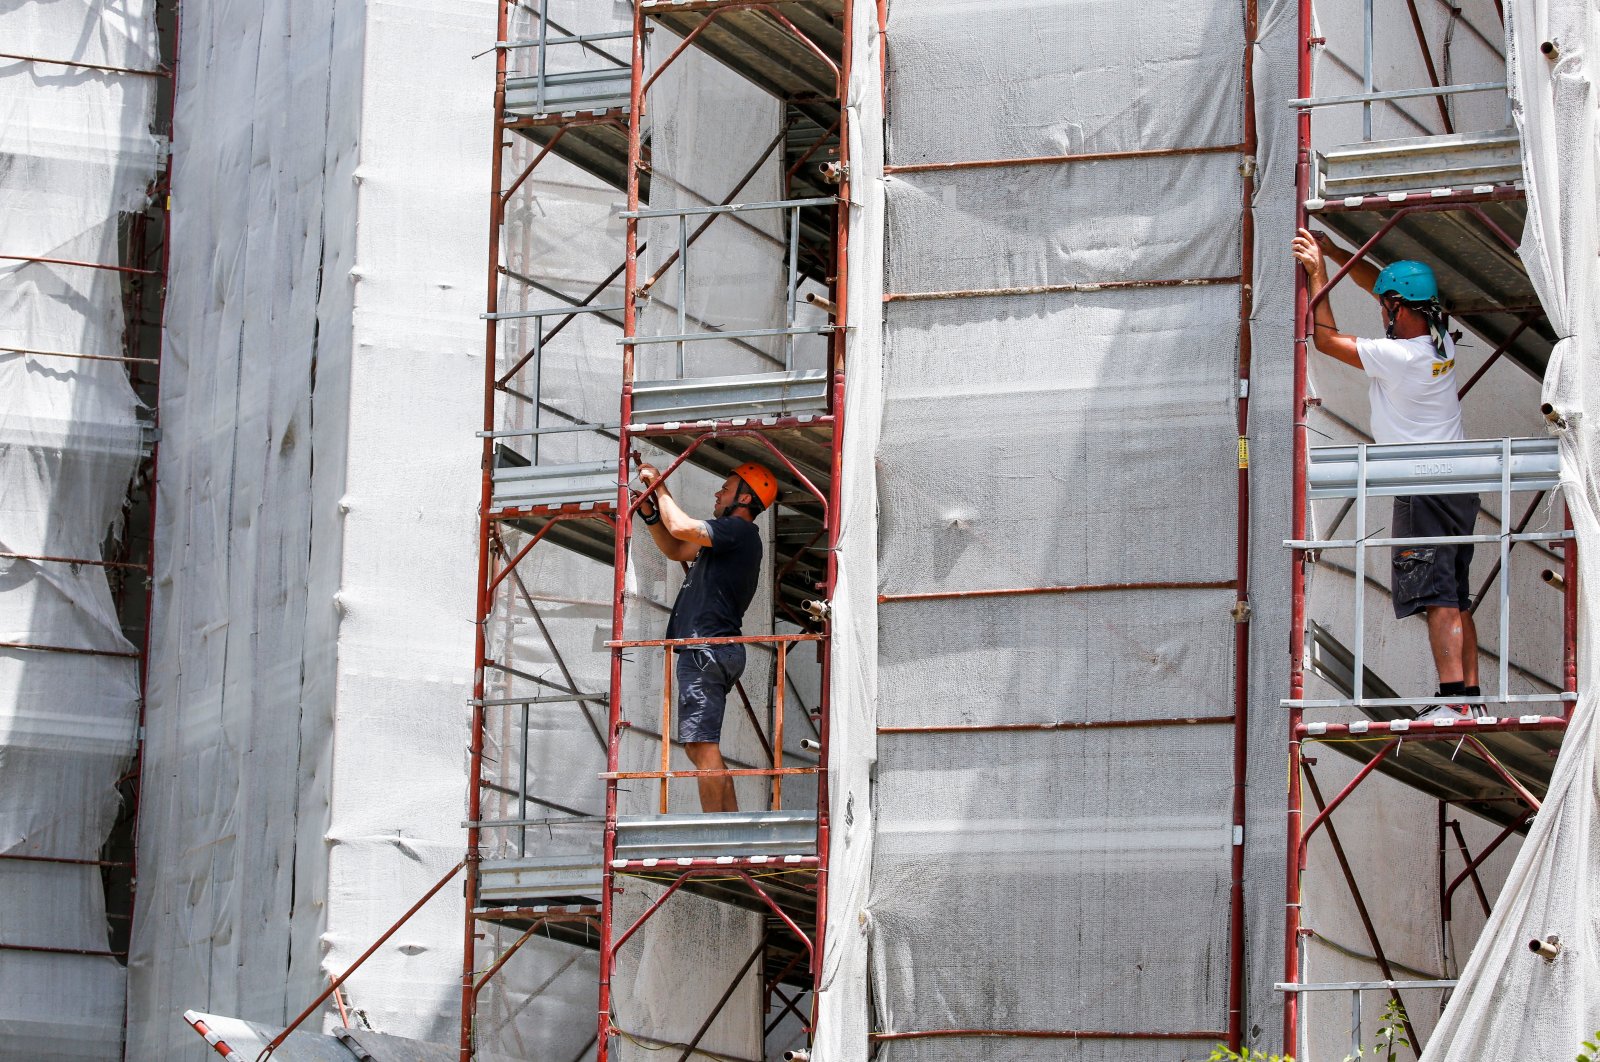 Builders from Pierluigi Fusco&#039;s firm work at the construction site of an energy-saving building, making apartments more energy efficient under government &quot;superbonus&quot; incentives, in Caserta, southern Italy, June 21, 2022. (Reuters Photo)